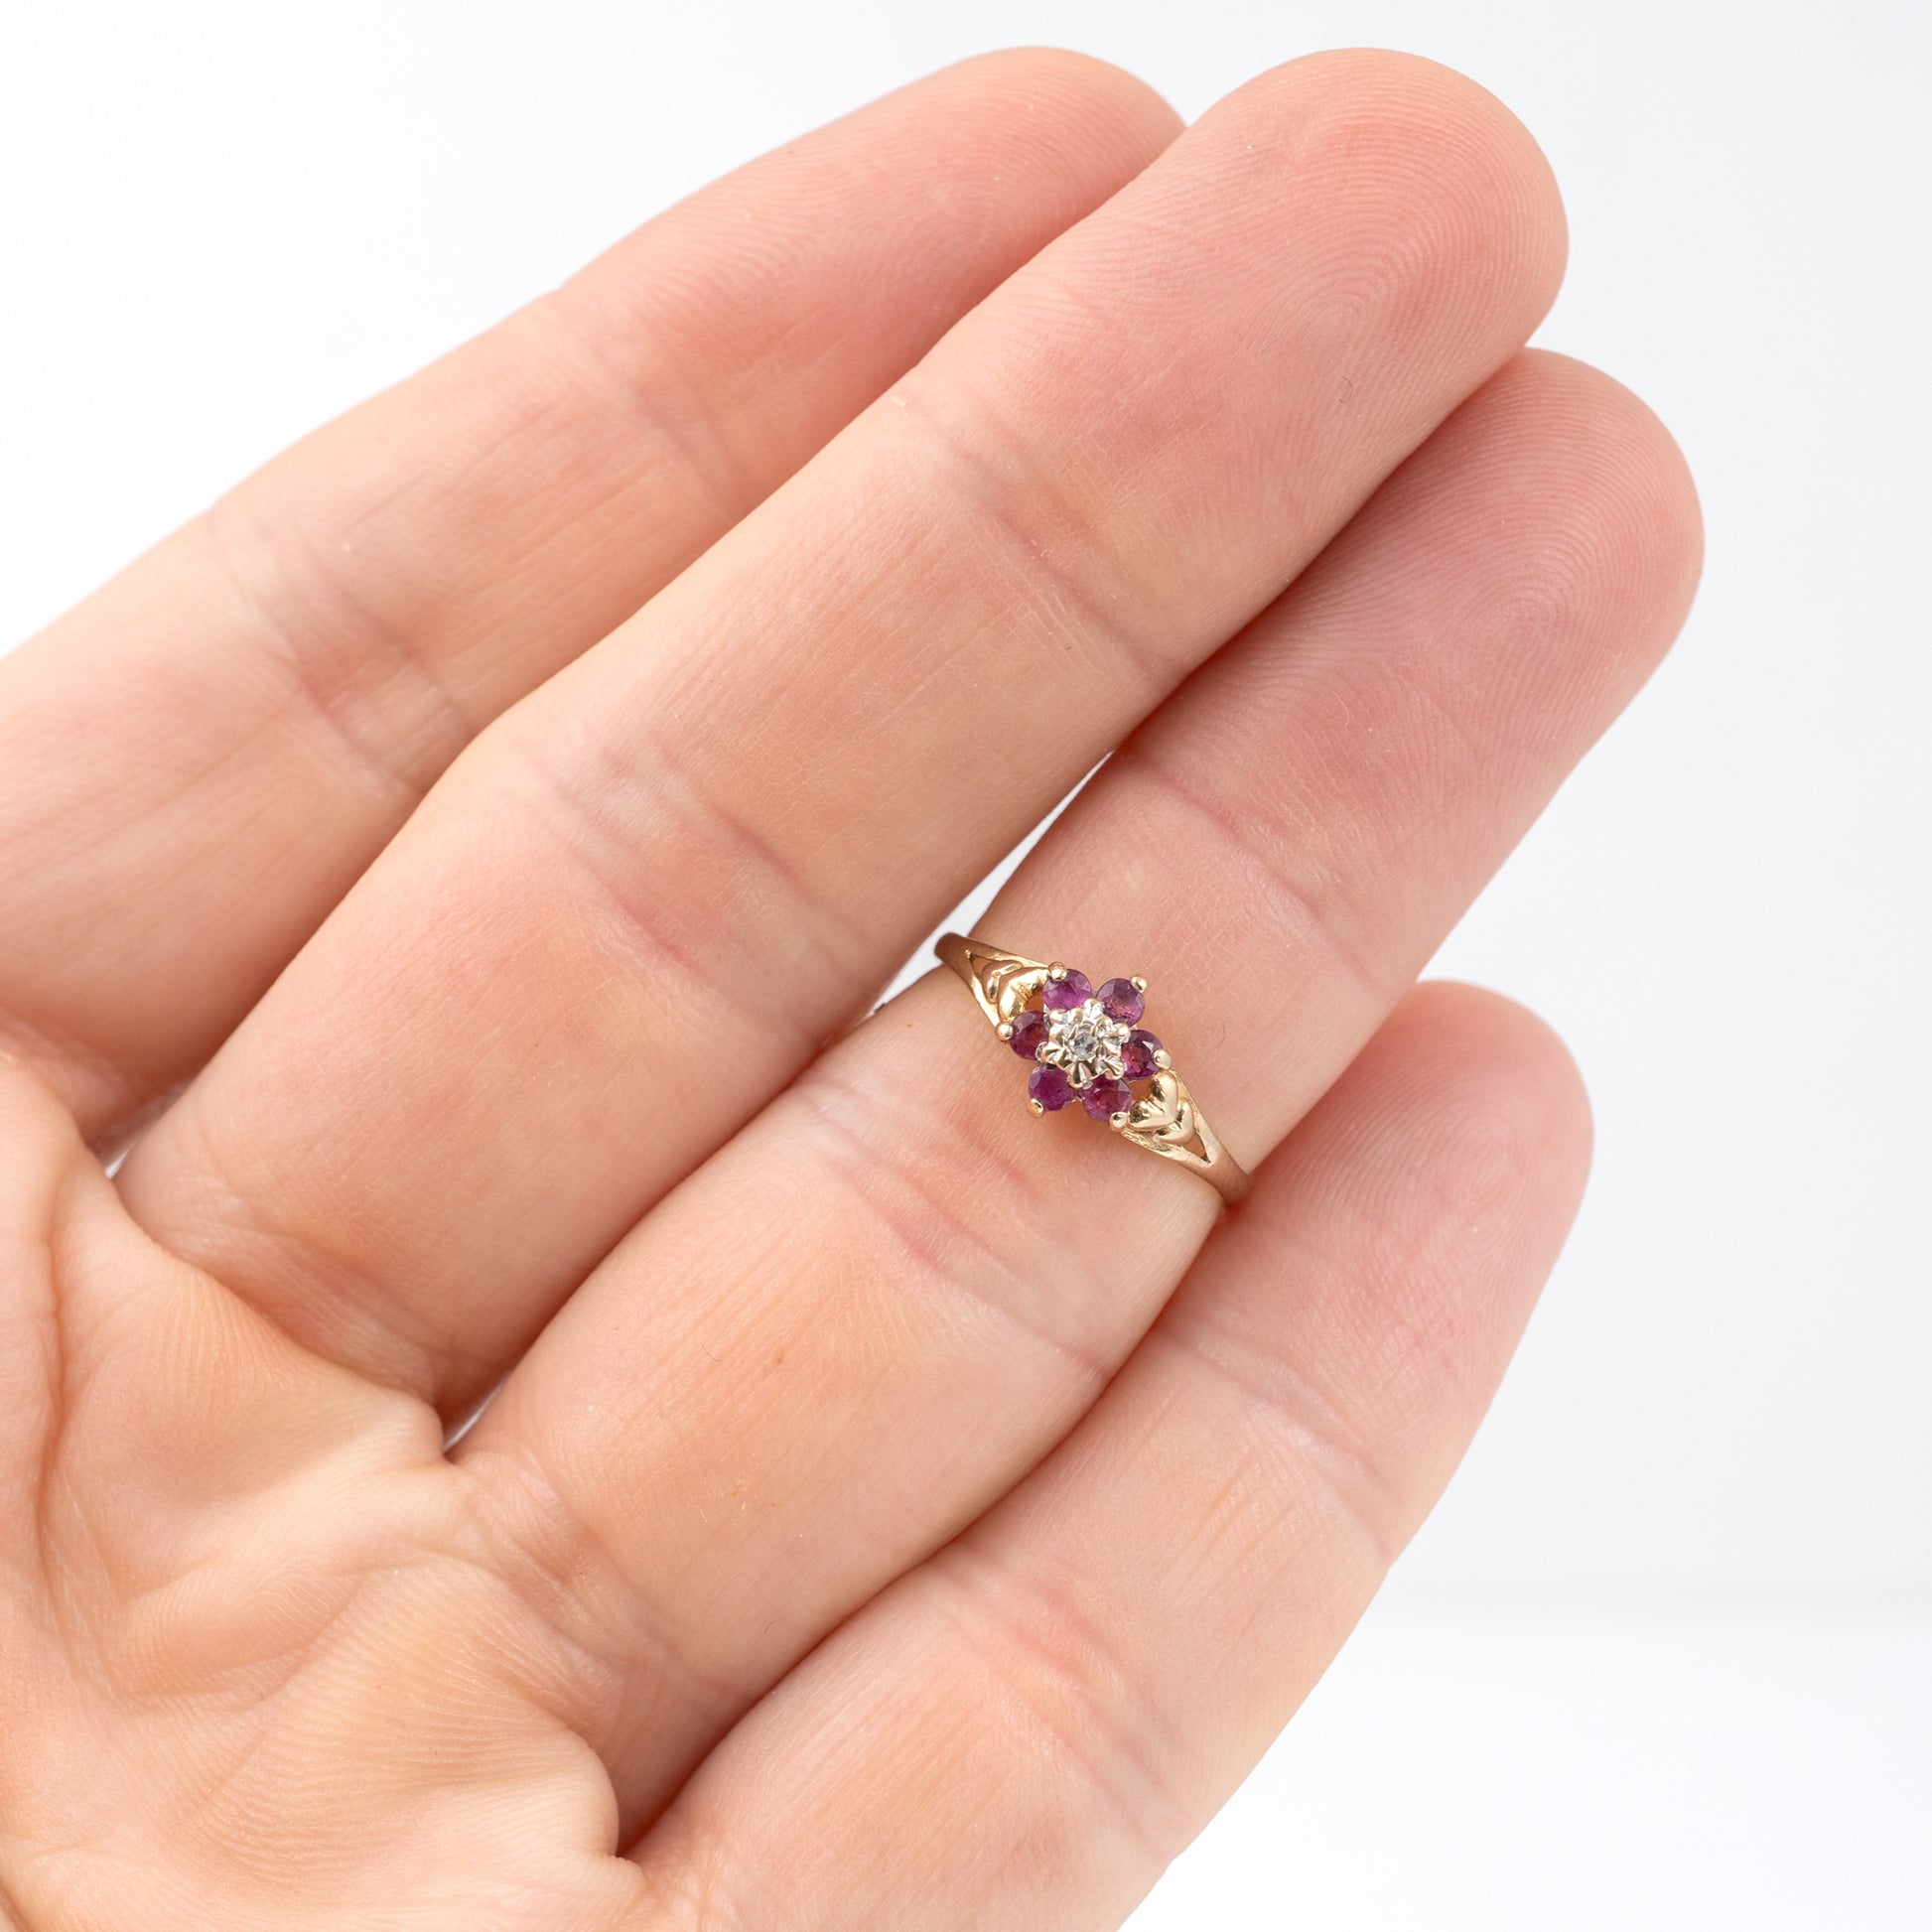 second hand ruby ring displayed on a hand